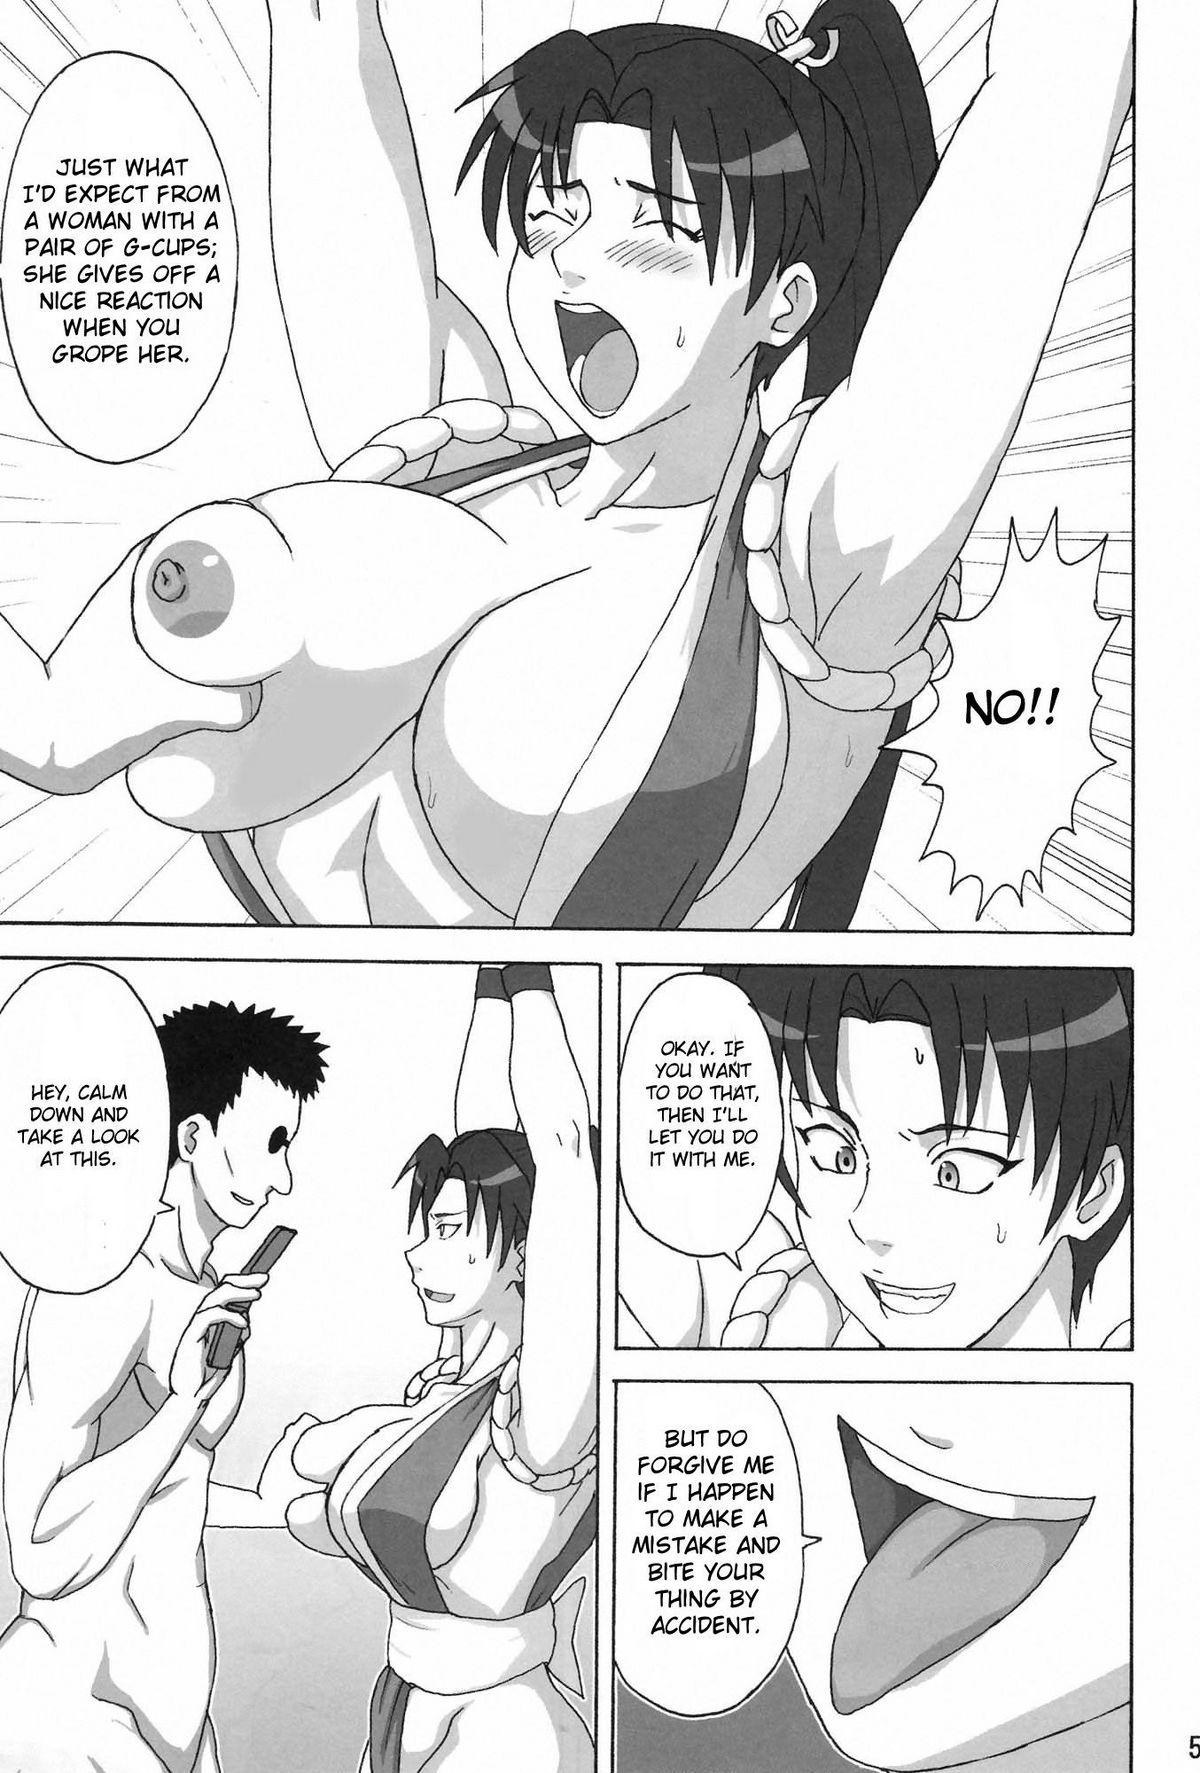 Hot Girls Fucking Mai x 3 - King of fighters Fatal fury Hottie - Page 6